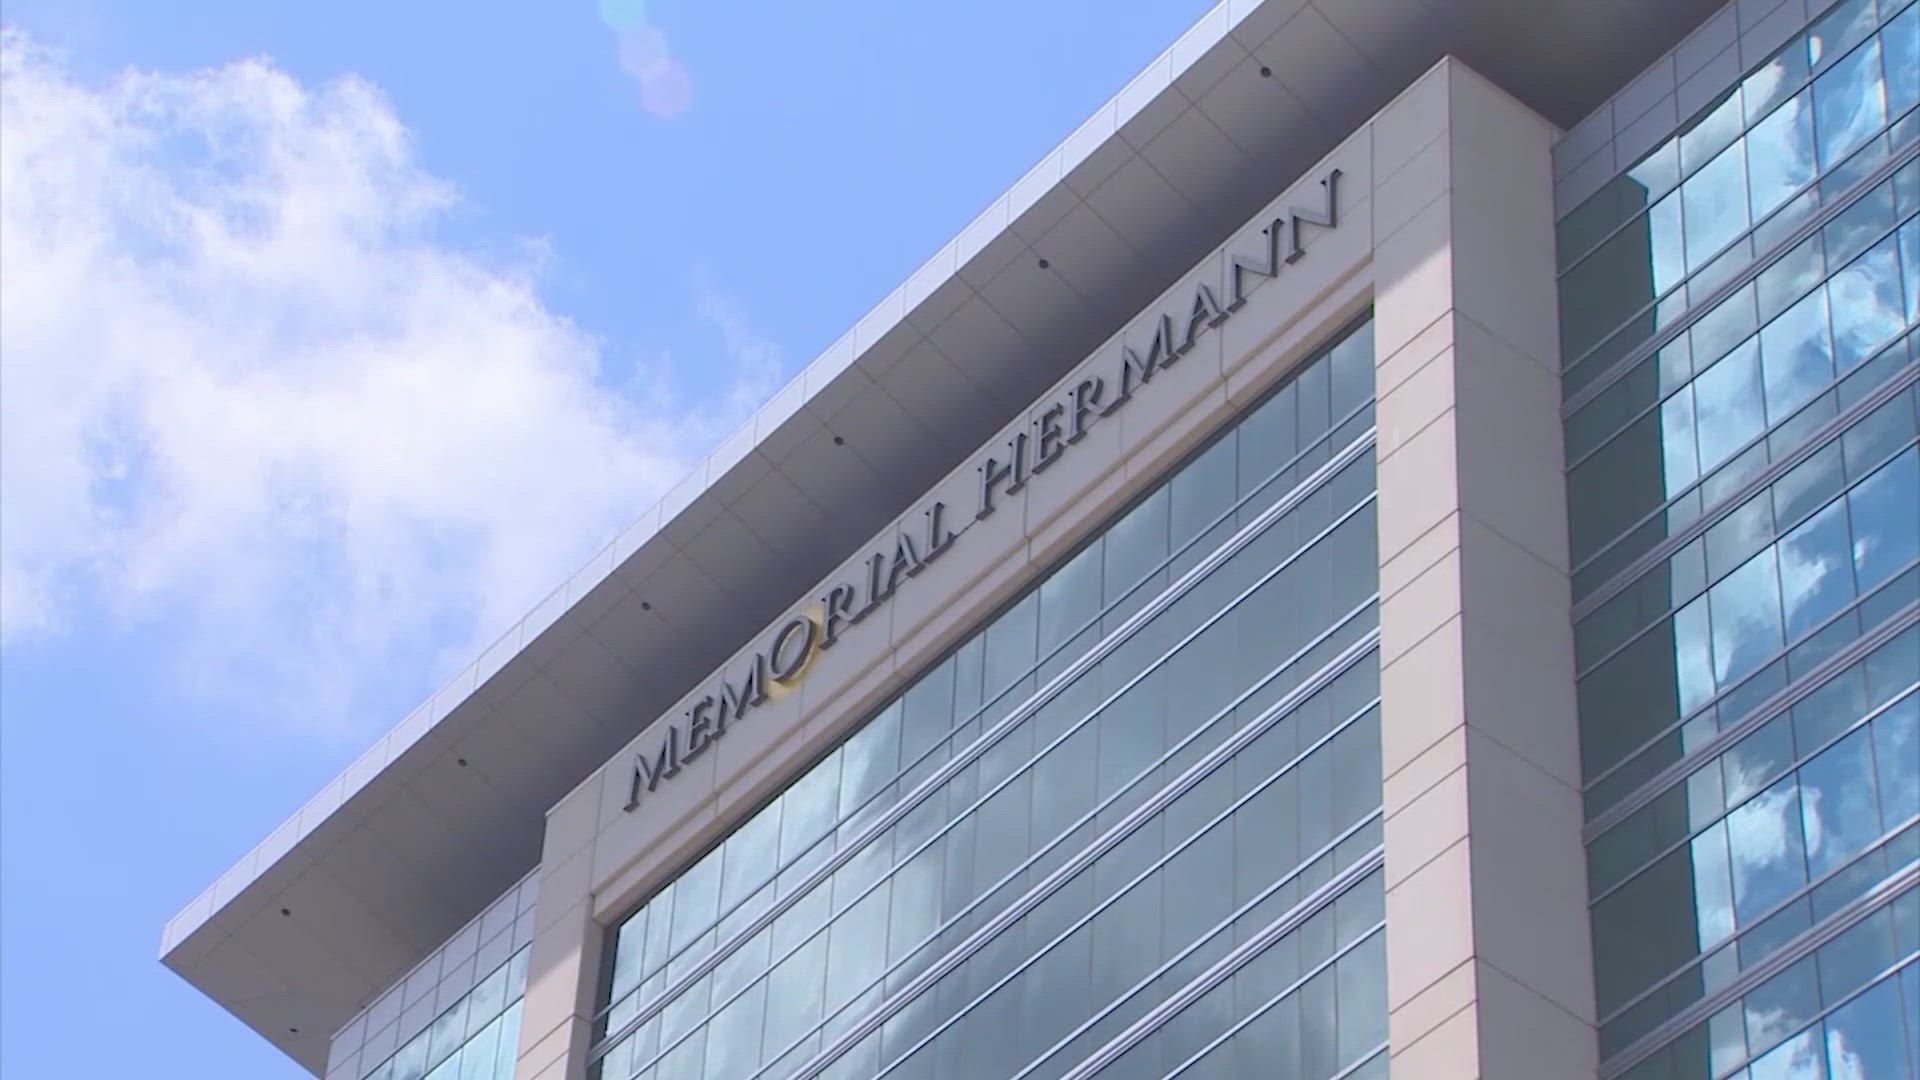 One woman hoping for a kidney transplant will have to wait longer after Memorial Hermann suspended its liver and kidney transplant program.